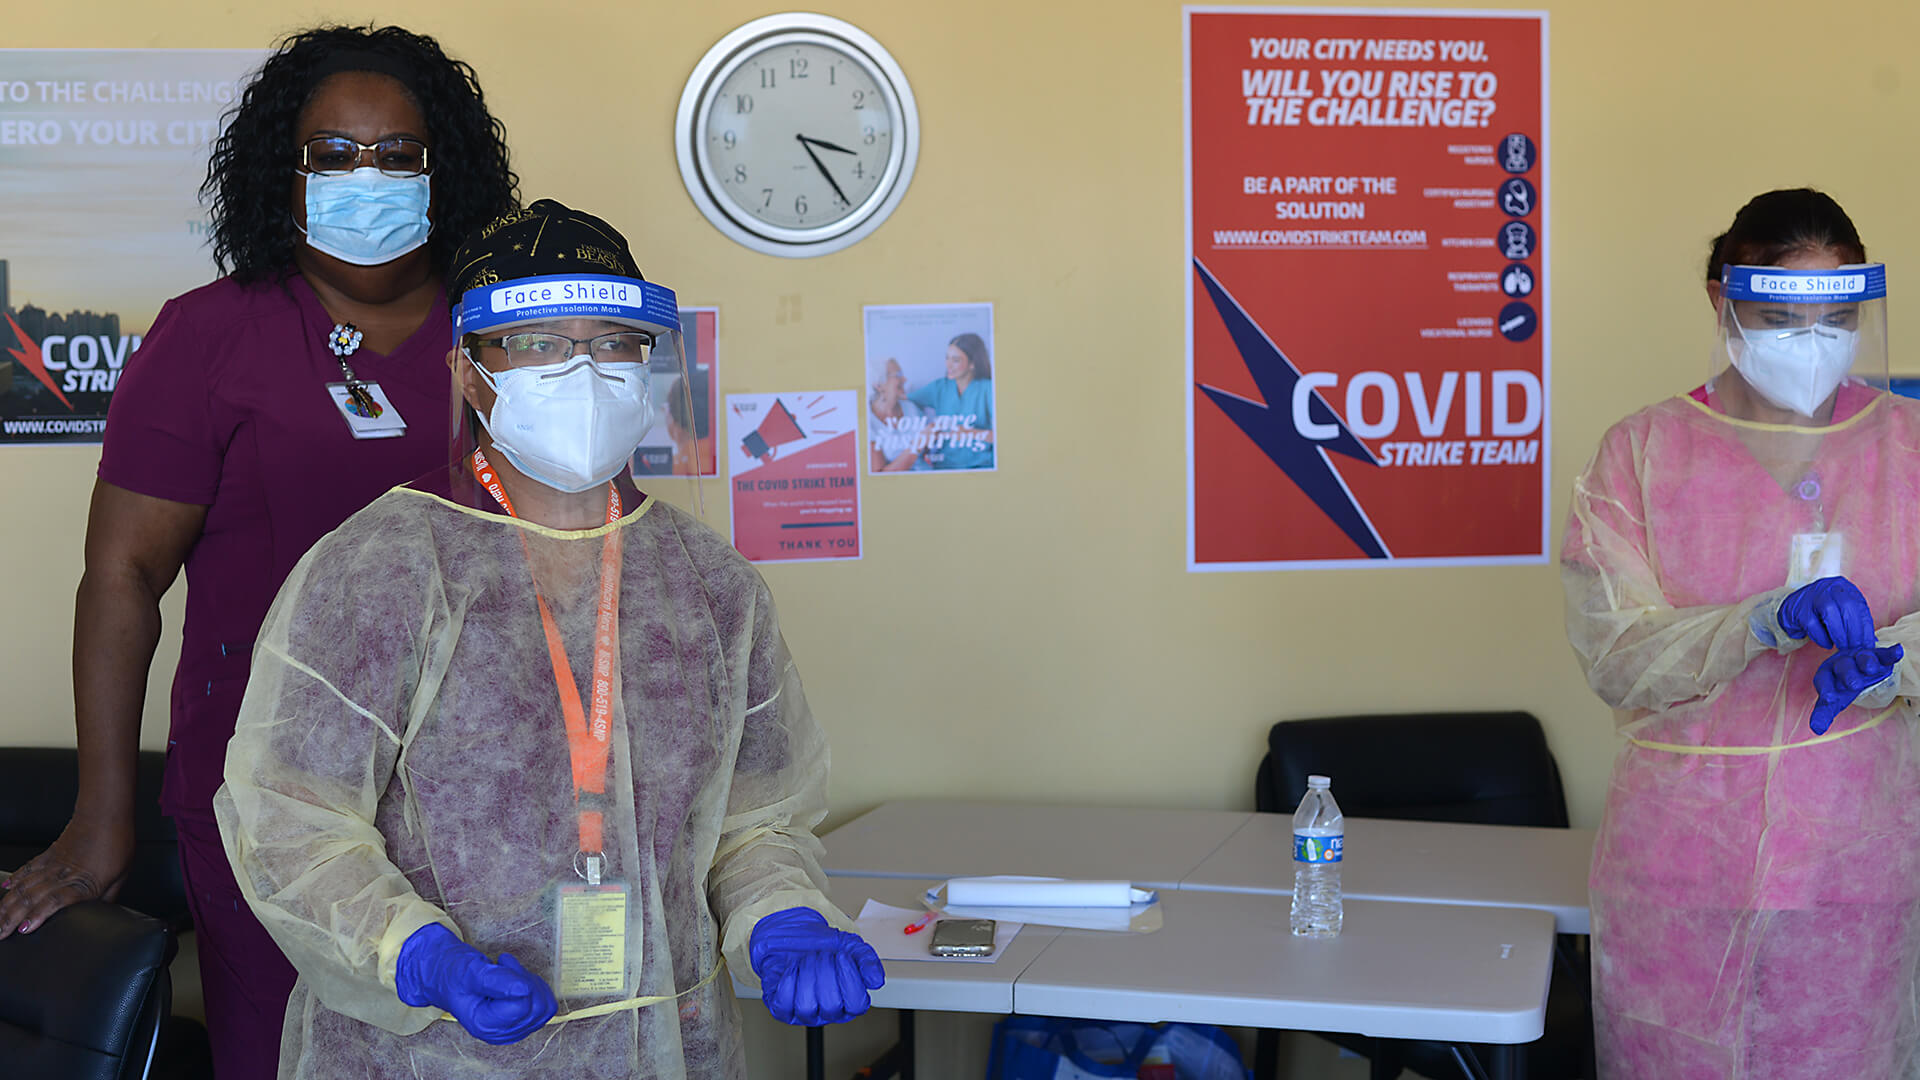 Monica Washington ties a gown for Celia Lagay during a demonstration of how to properly do personal protective equipment (PPE) to prevent against COVID-19 at the Eastland Subacute and Rehabilitation Center in El Monte, California.